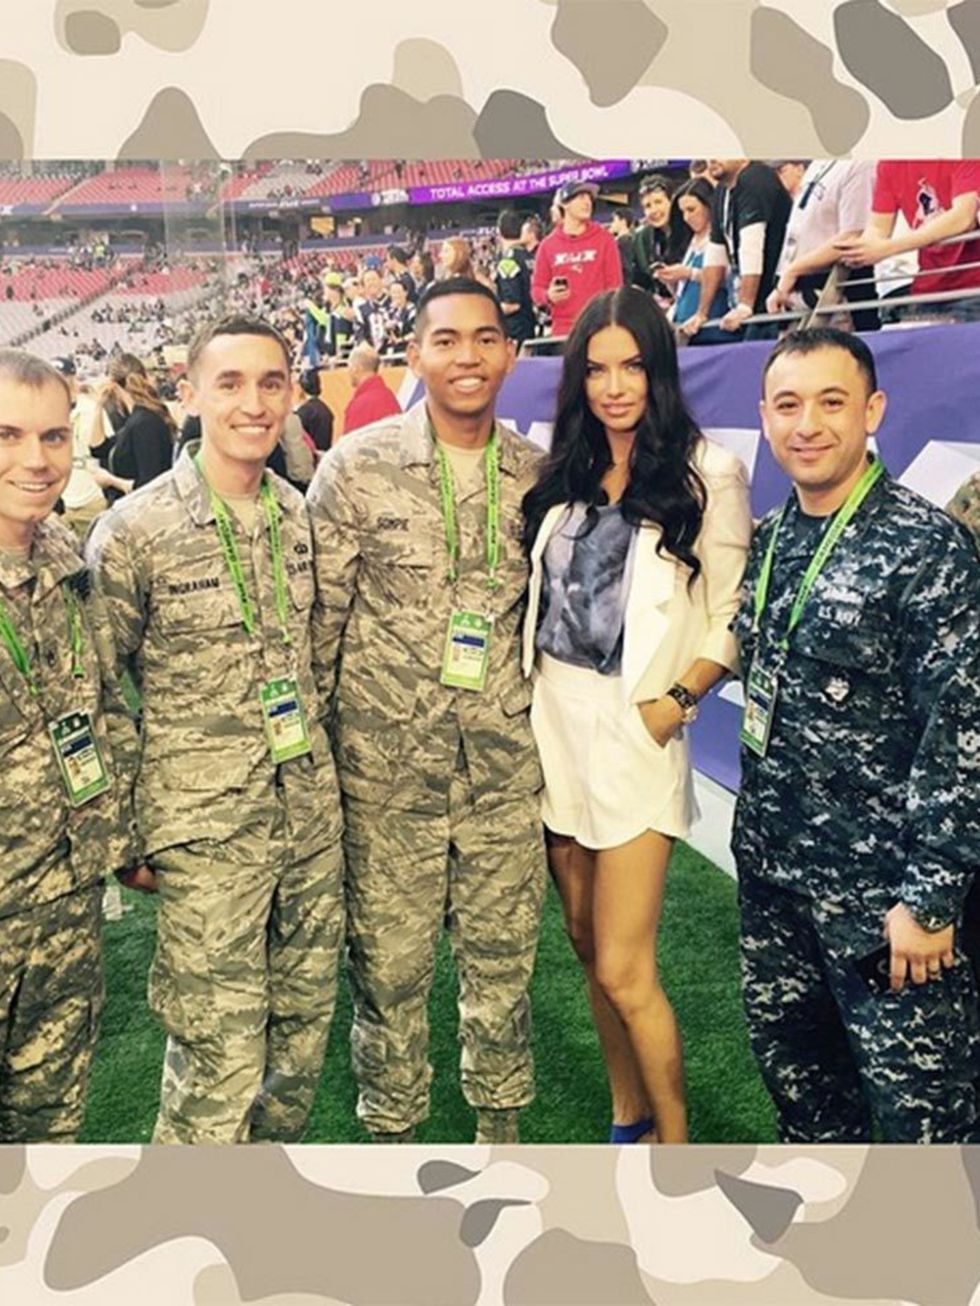 <p>Adriana Lima (@adrianalima)</p>

<p>'With the flag bearers of #superbowl good luck to both teams tonight...'</p>